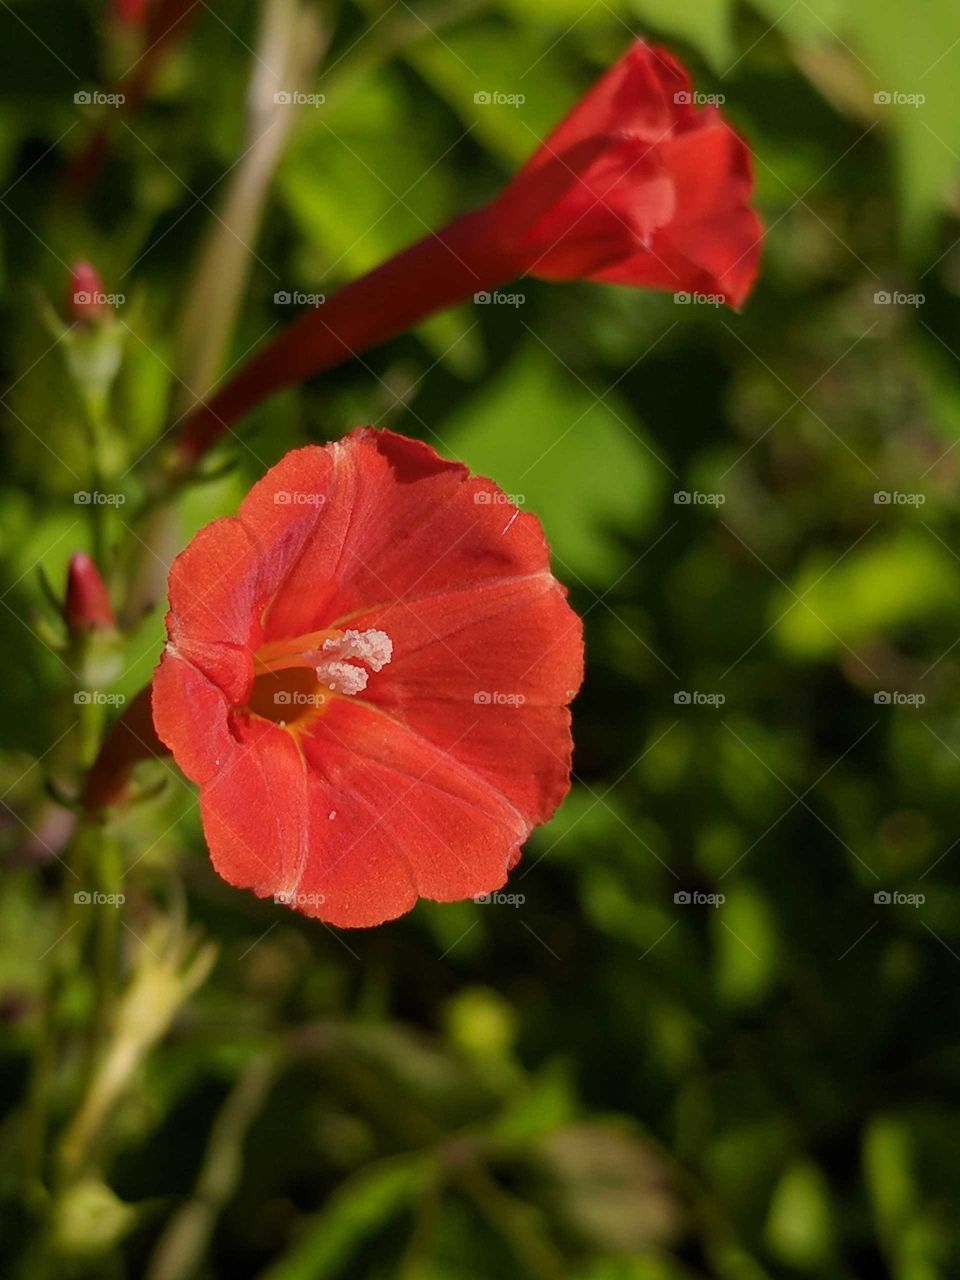 Red Morning Glory